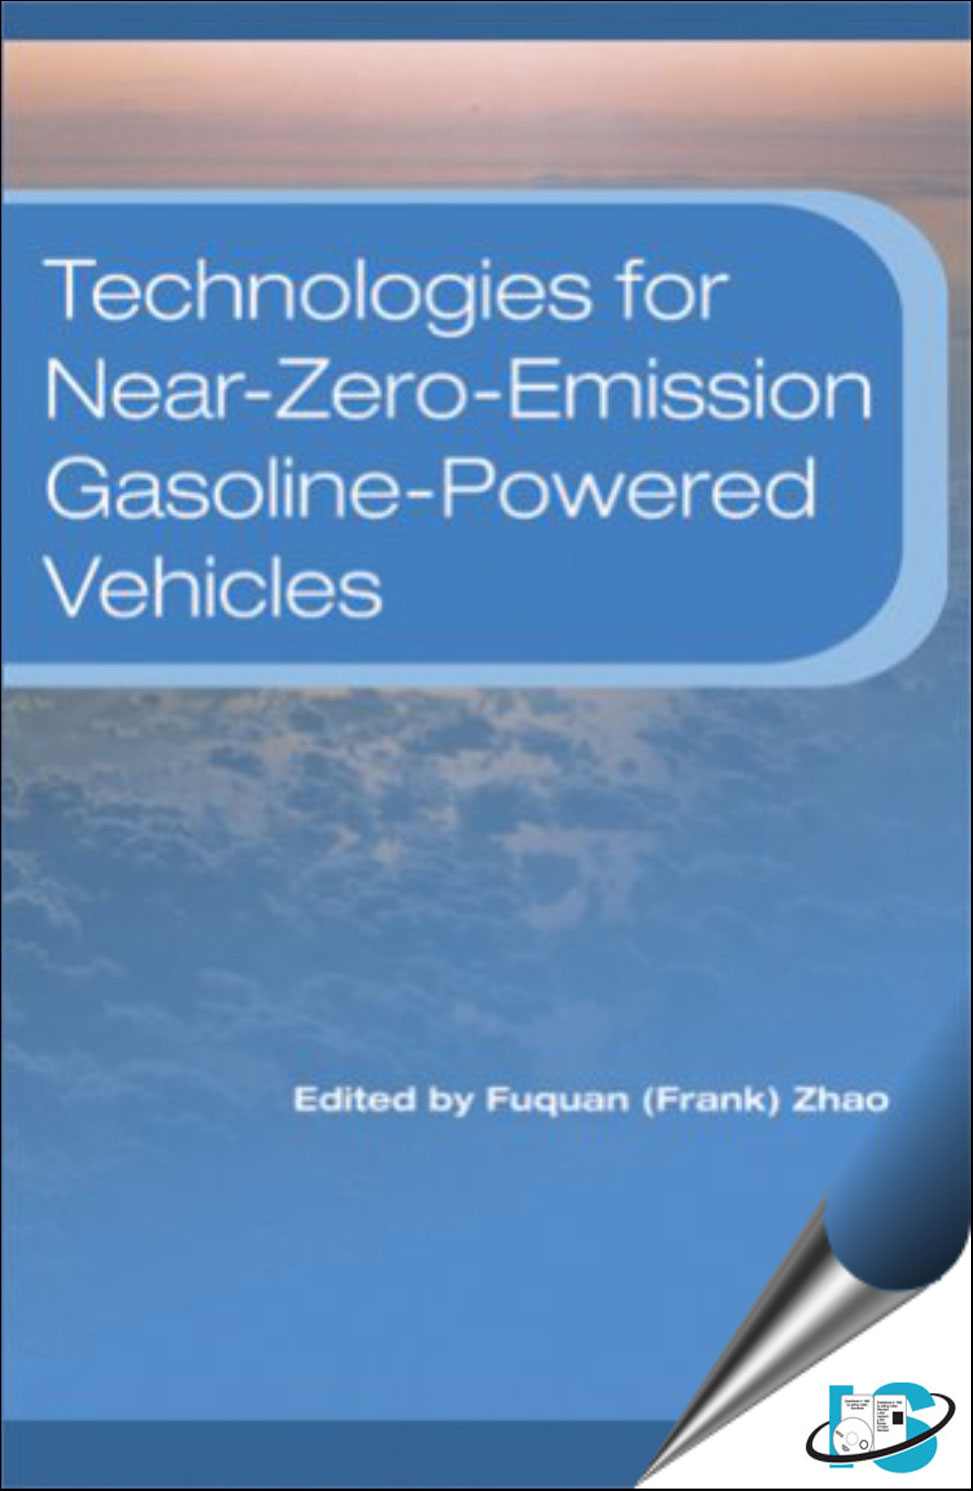 Technologies for NearZeroEmission GasolinePowered Vehicles, Fuquan